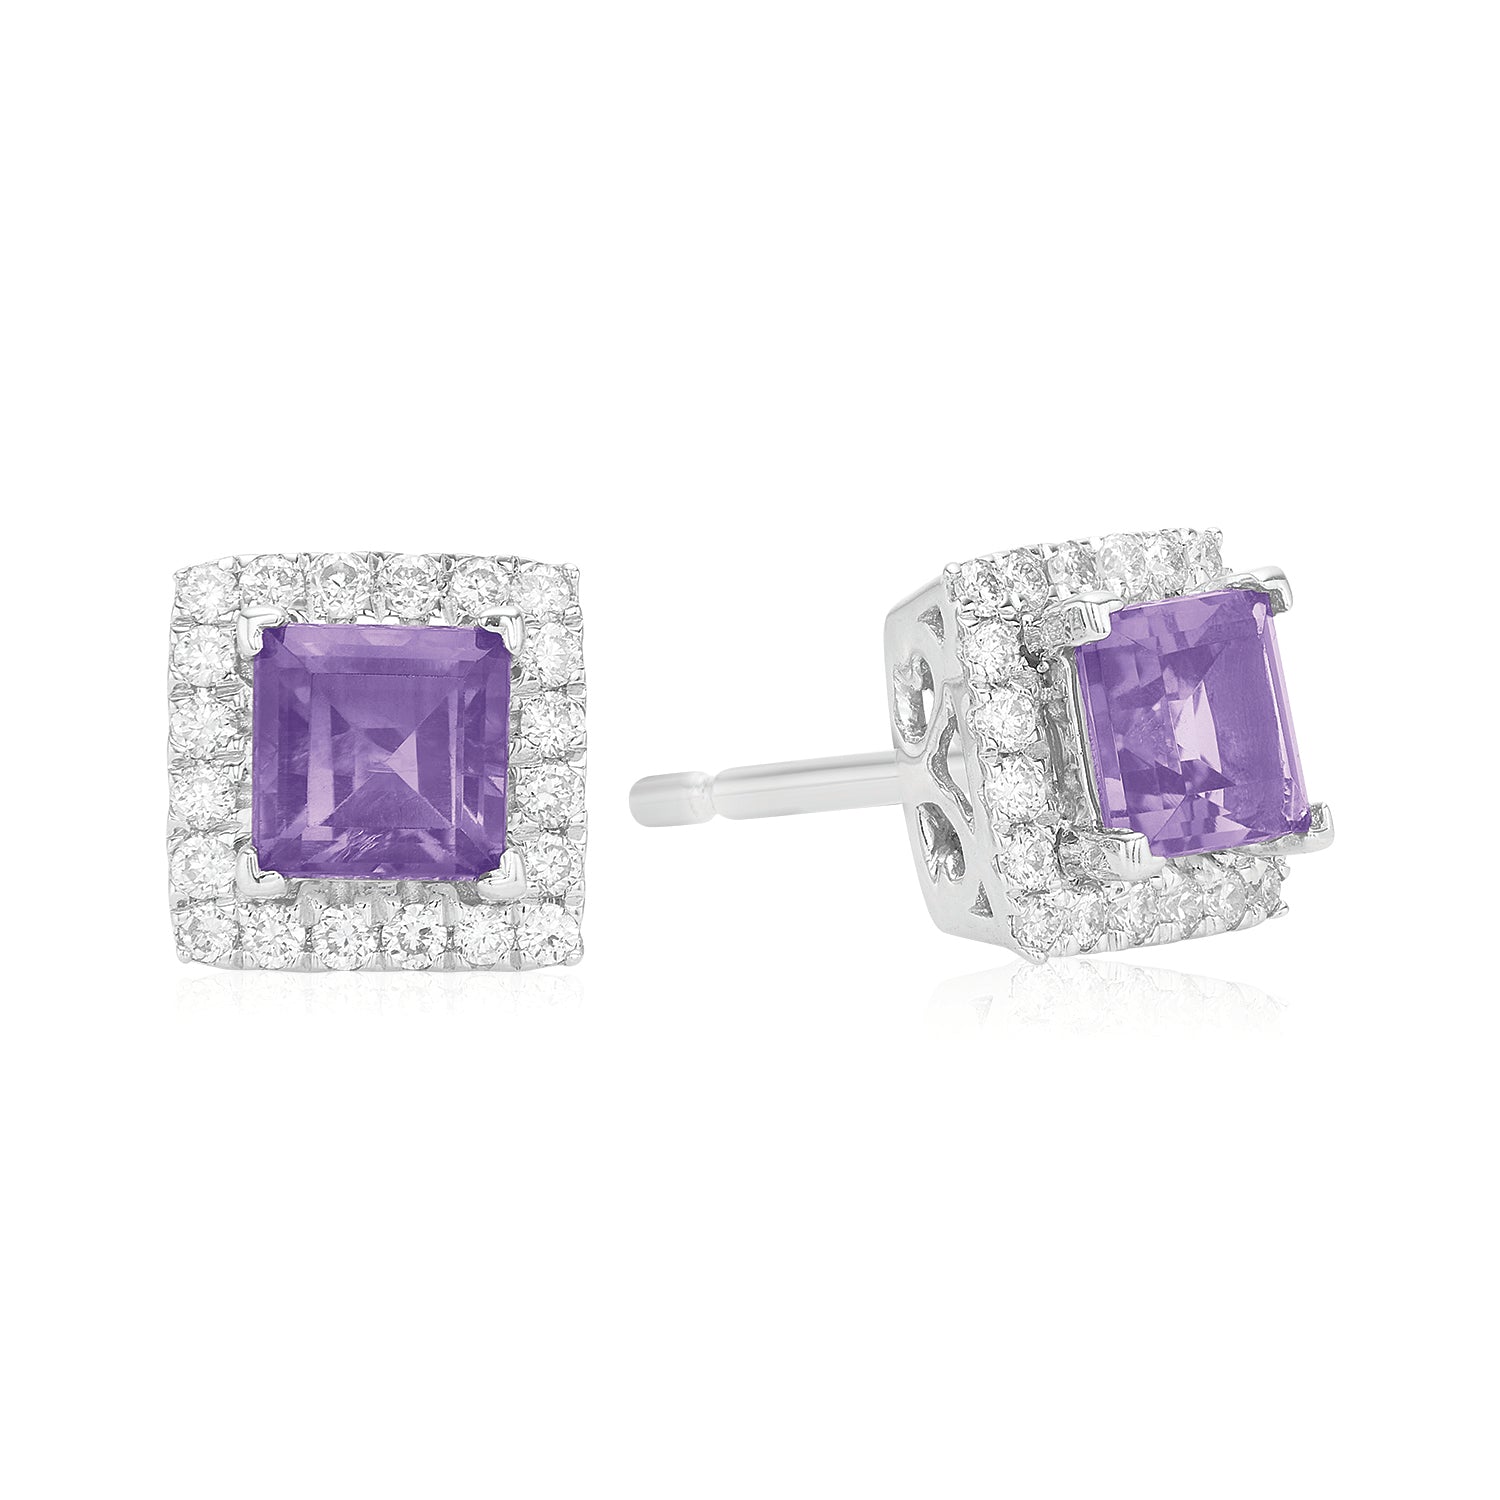 Stunning Amethyst and Diamond Halo Earrings for Older Girls and Teens in  14K White Gold - The Jewelry Vine